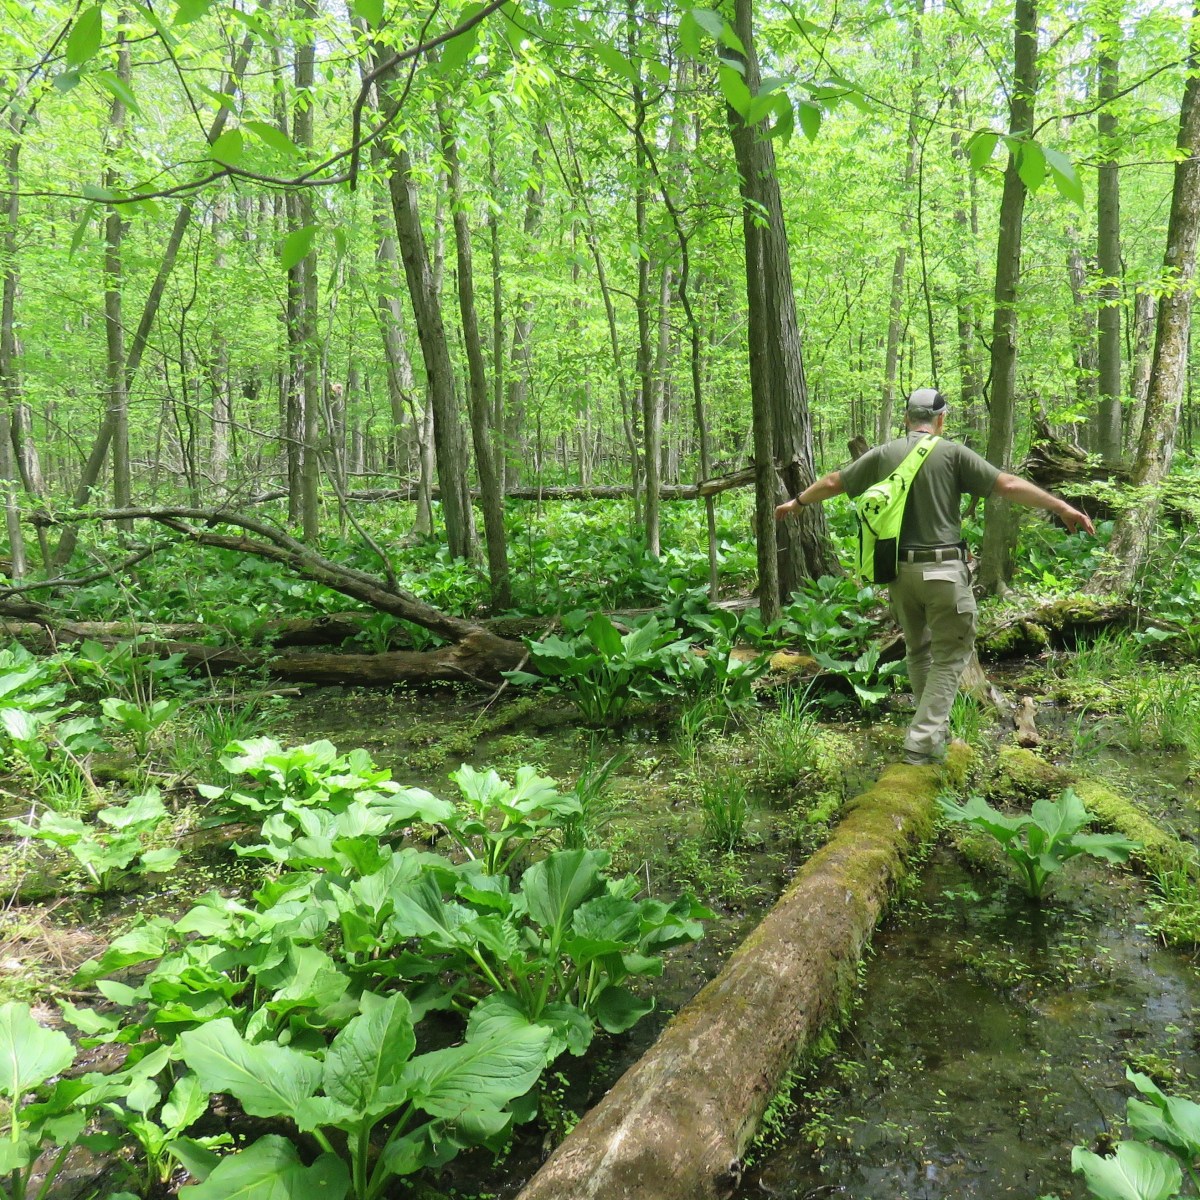 A man walks, with arms outstretched for balance, across a fallen log in the woods